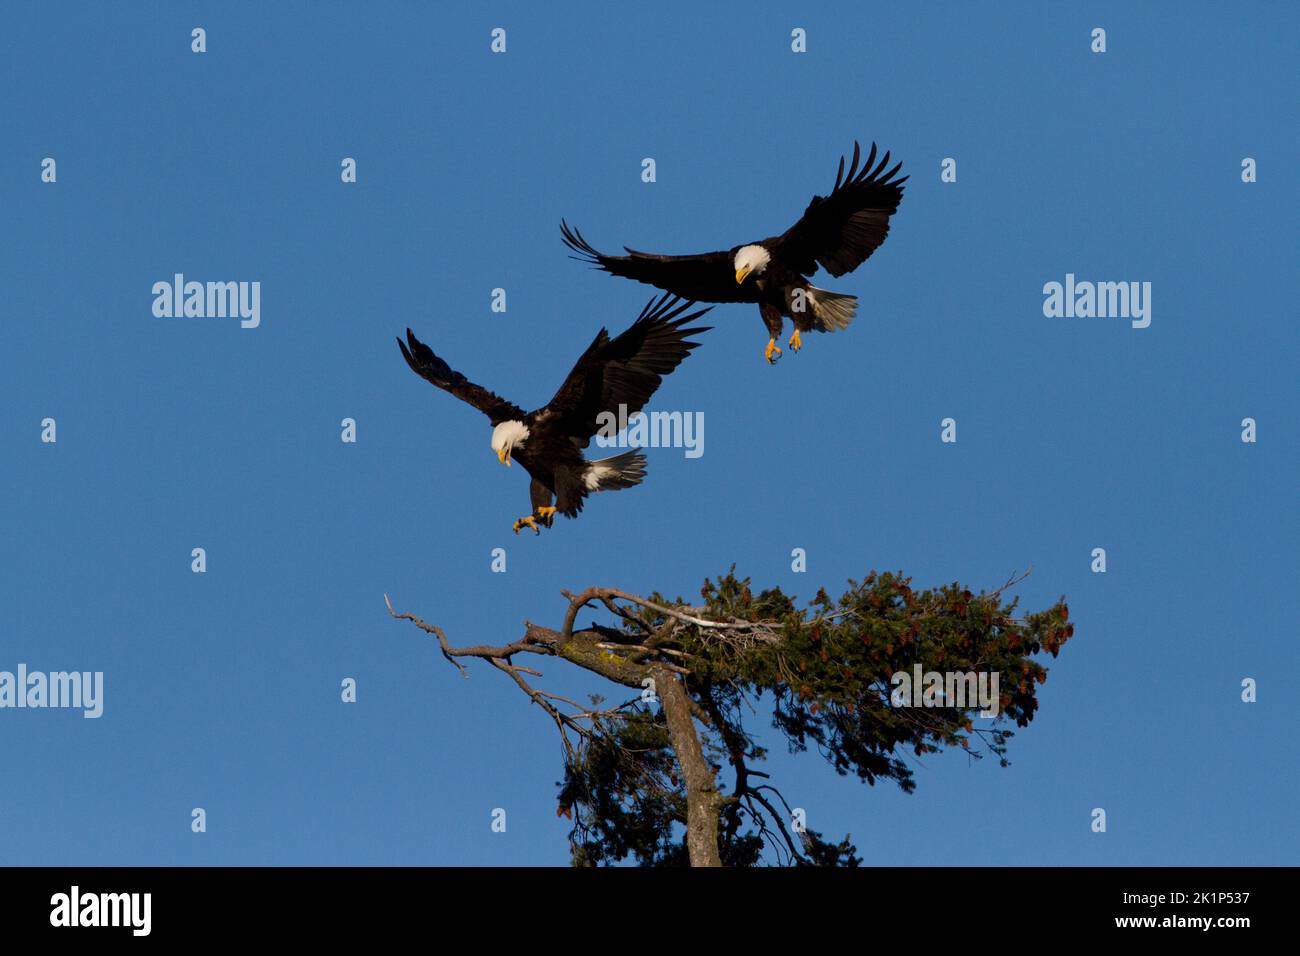 Two Bald Eagles (Haliaeetus leucocephalus) about to land on the top of a douglas fir tree along the coast at Nanaimo, Vancouver Island, BC, Canada Stock Photo